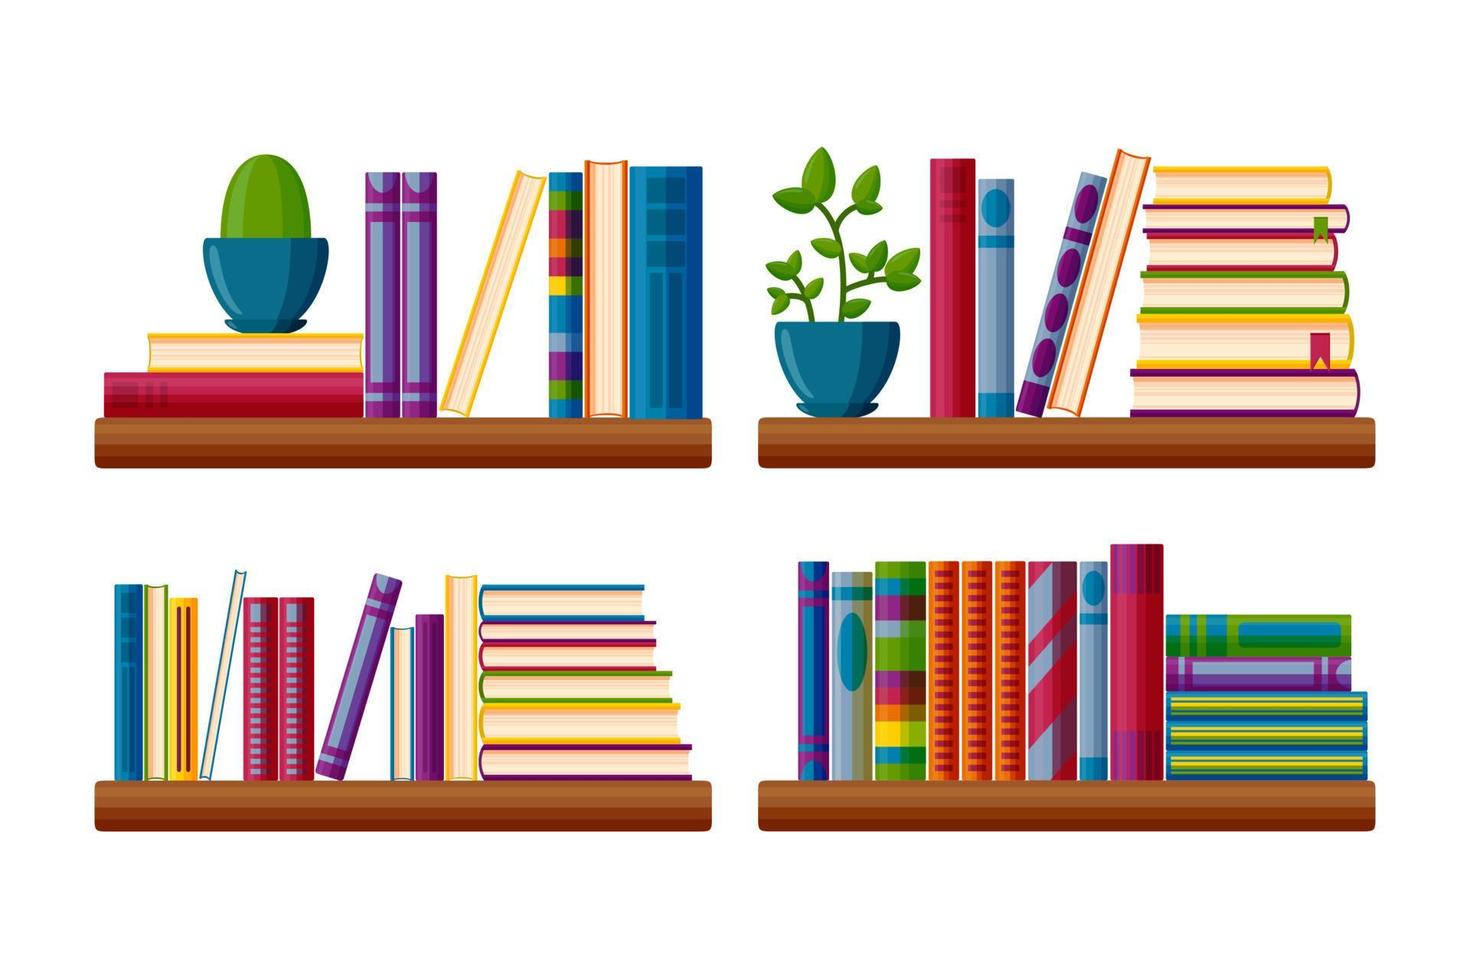 Bookcase shelves with potted plants. Bestseller books stack in cartoon style. Vector illustration